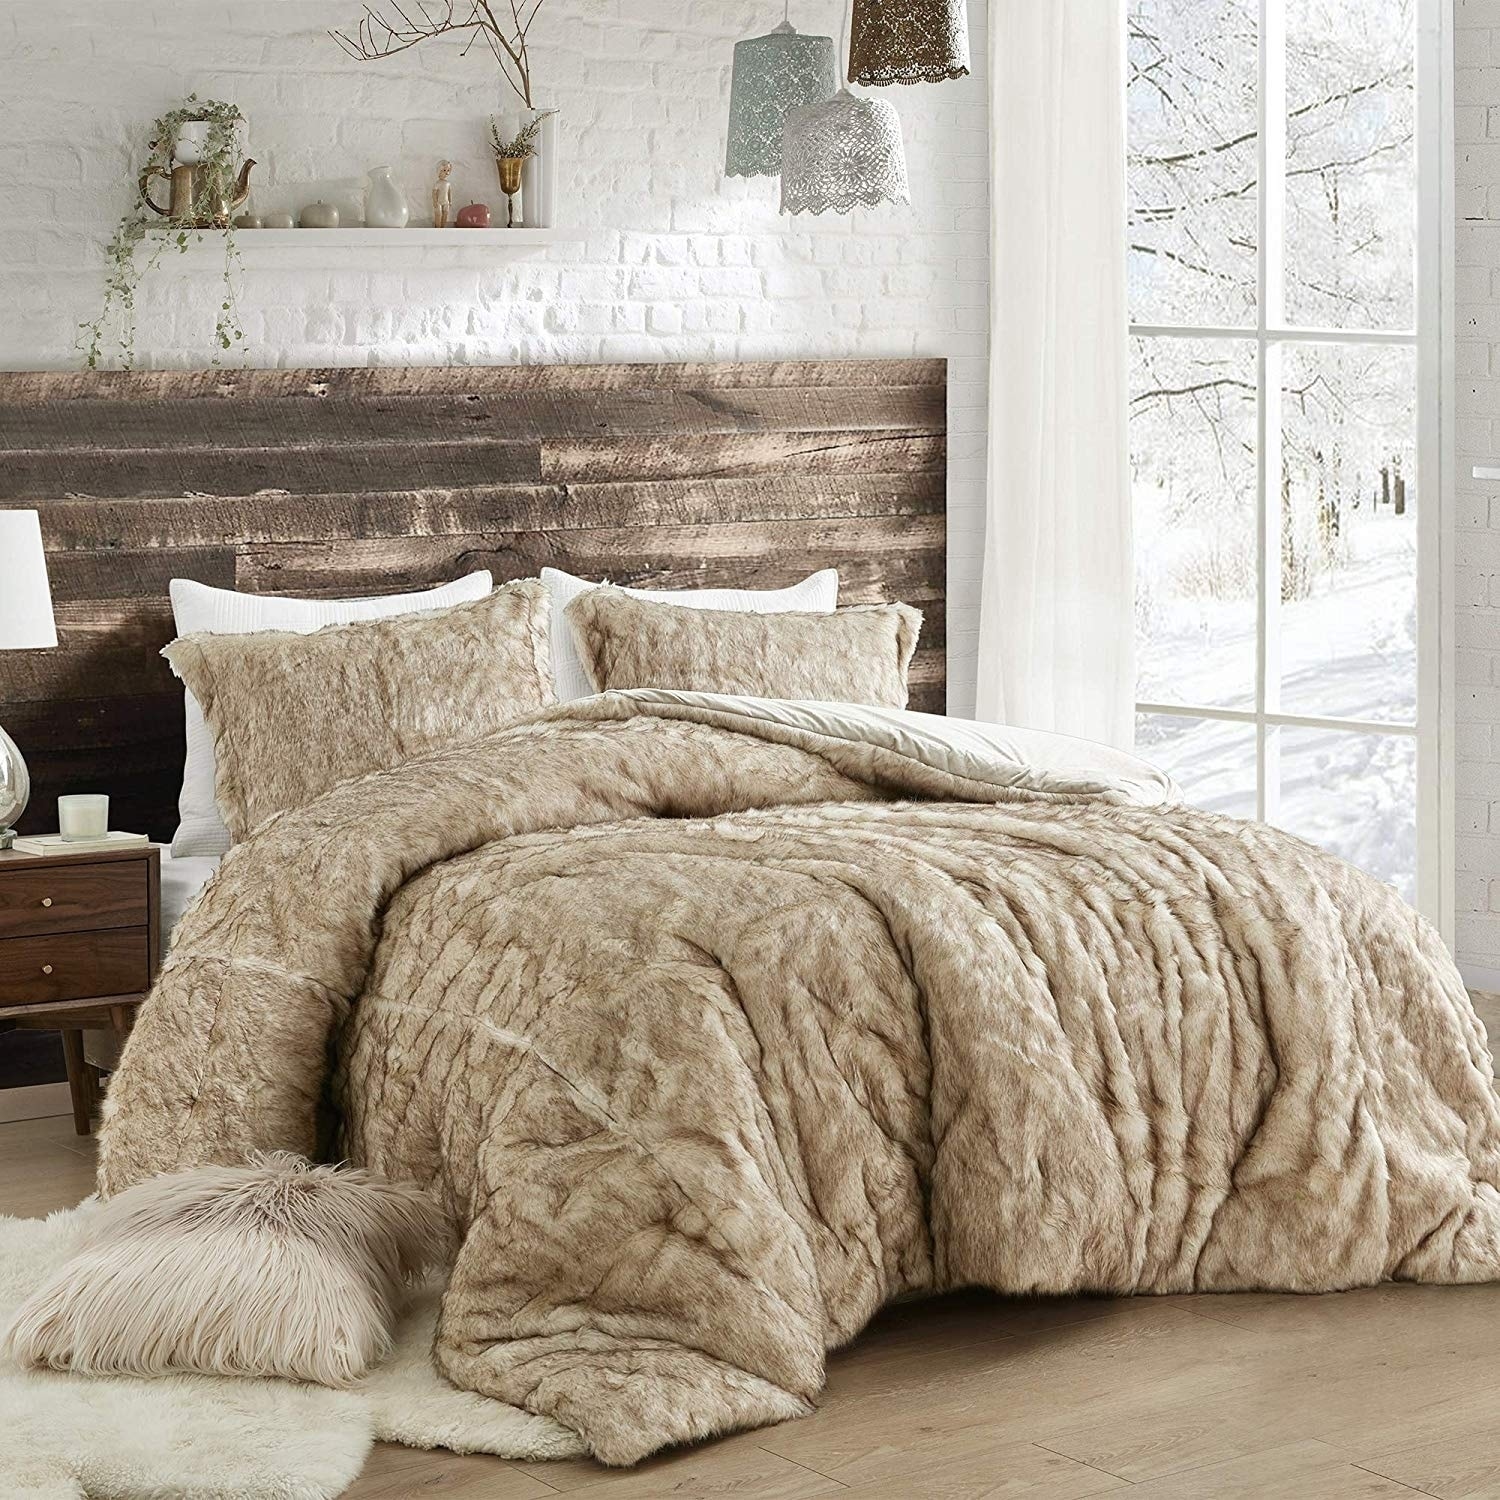 Brown Farmhouse Comforters and Sets - Bed Bath & Beyond